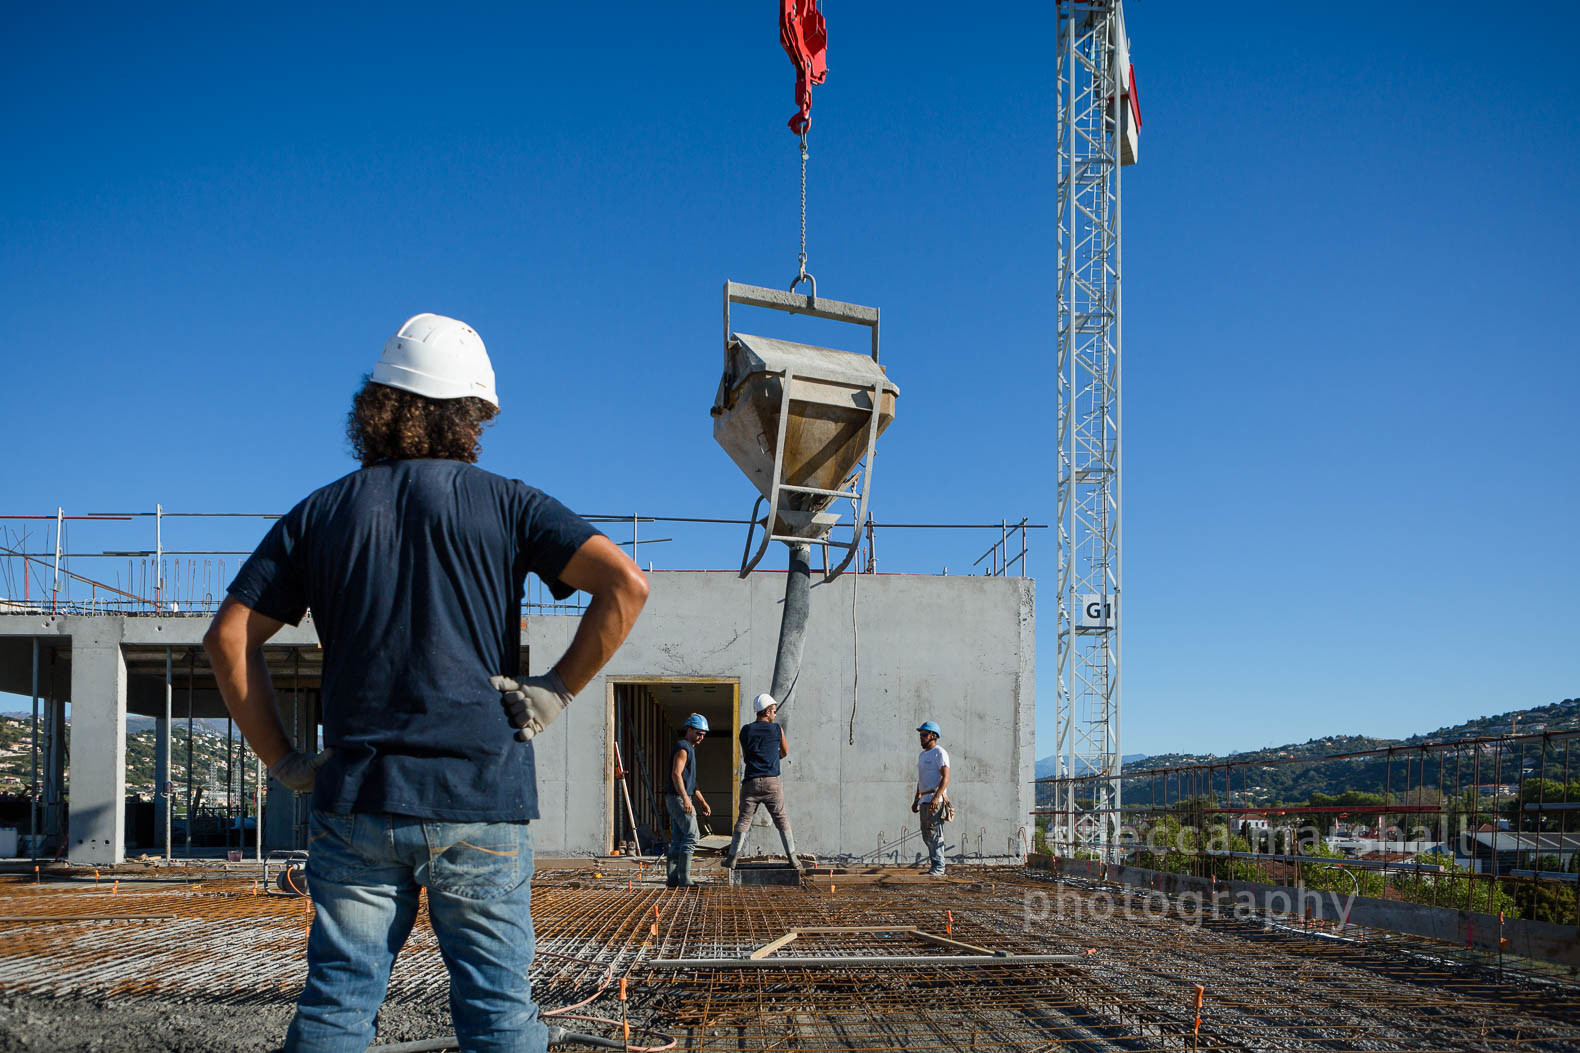 Photograph of construction workers on the rooftop of a building site